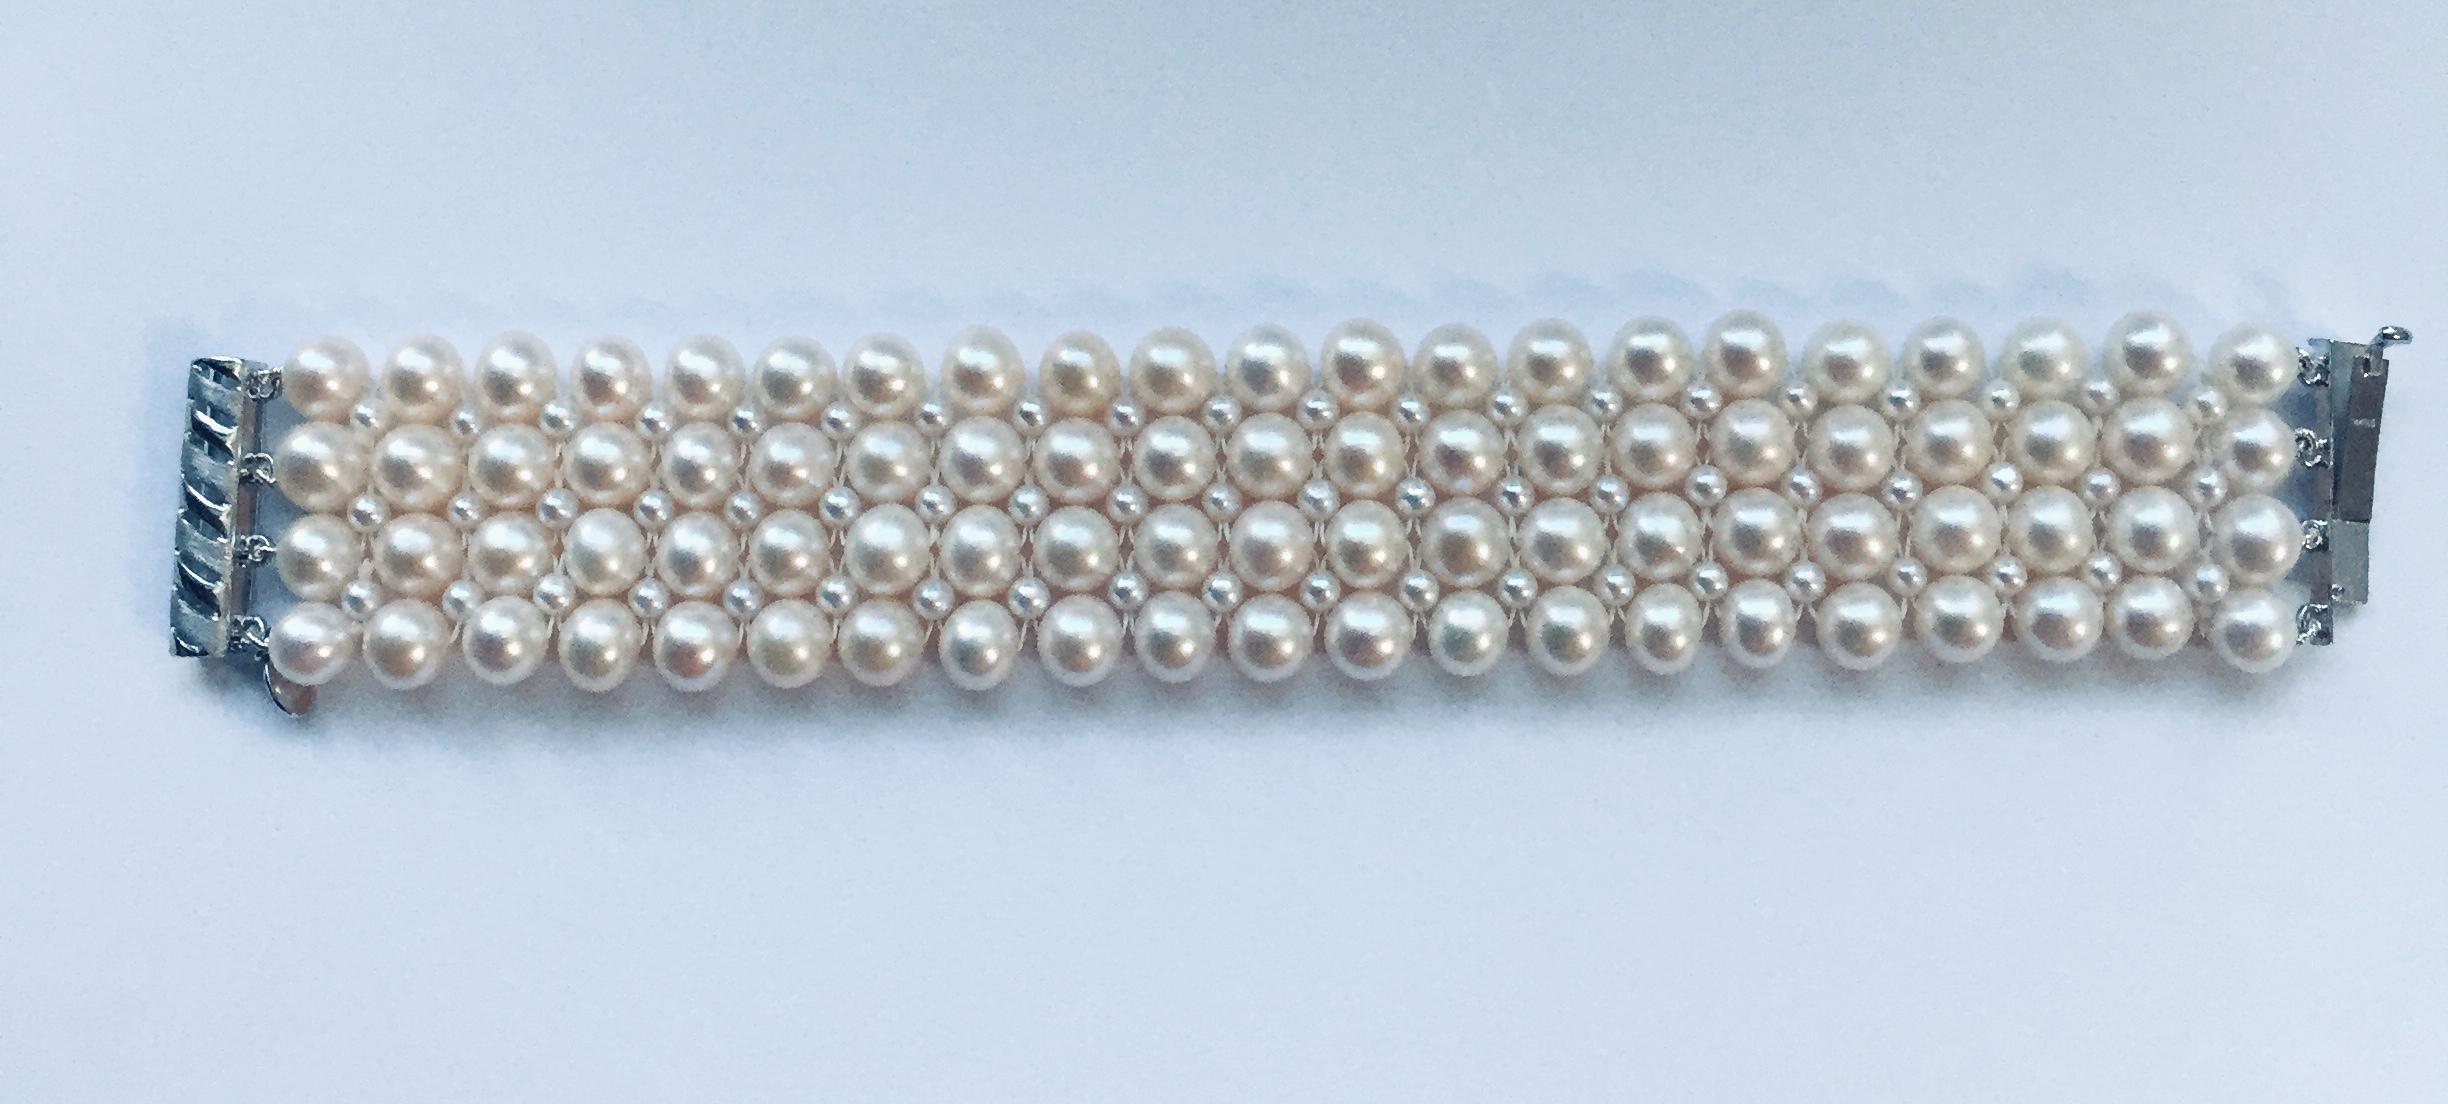 Marina J. Hand-Woven Pearl Bracelet with 14 Karat White Gold Plated Clasp 4